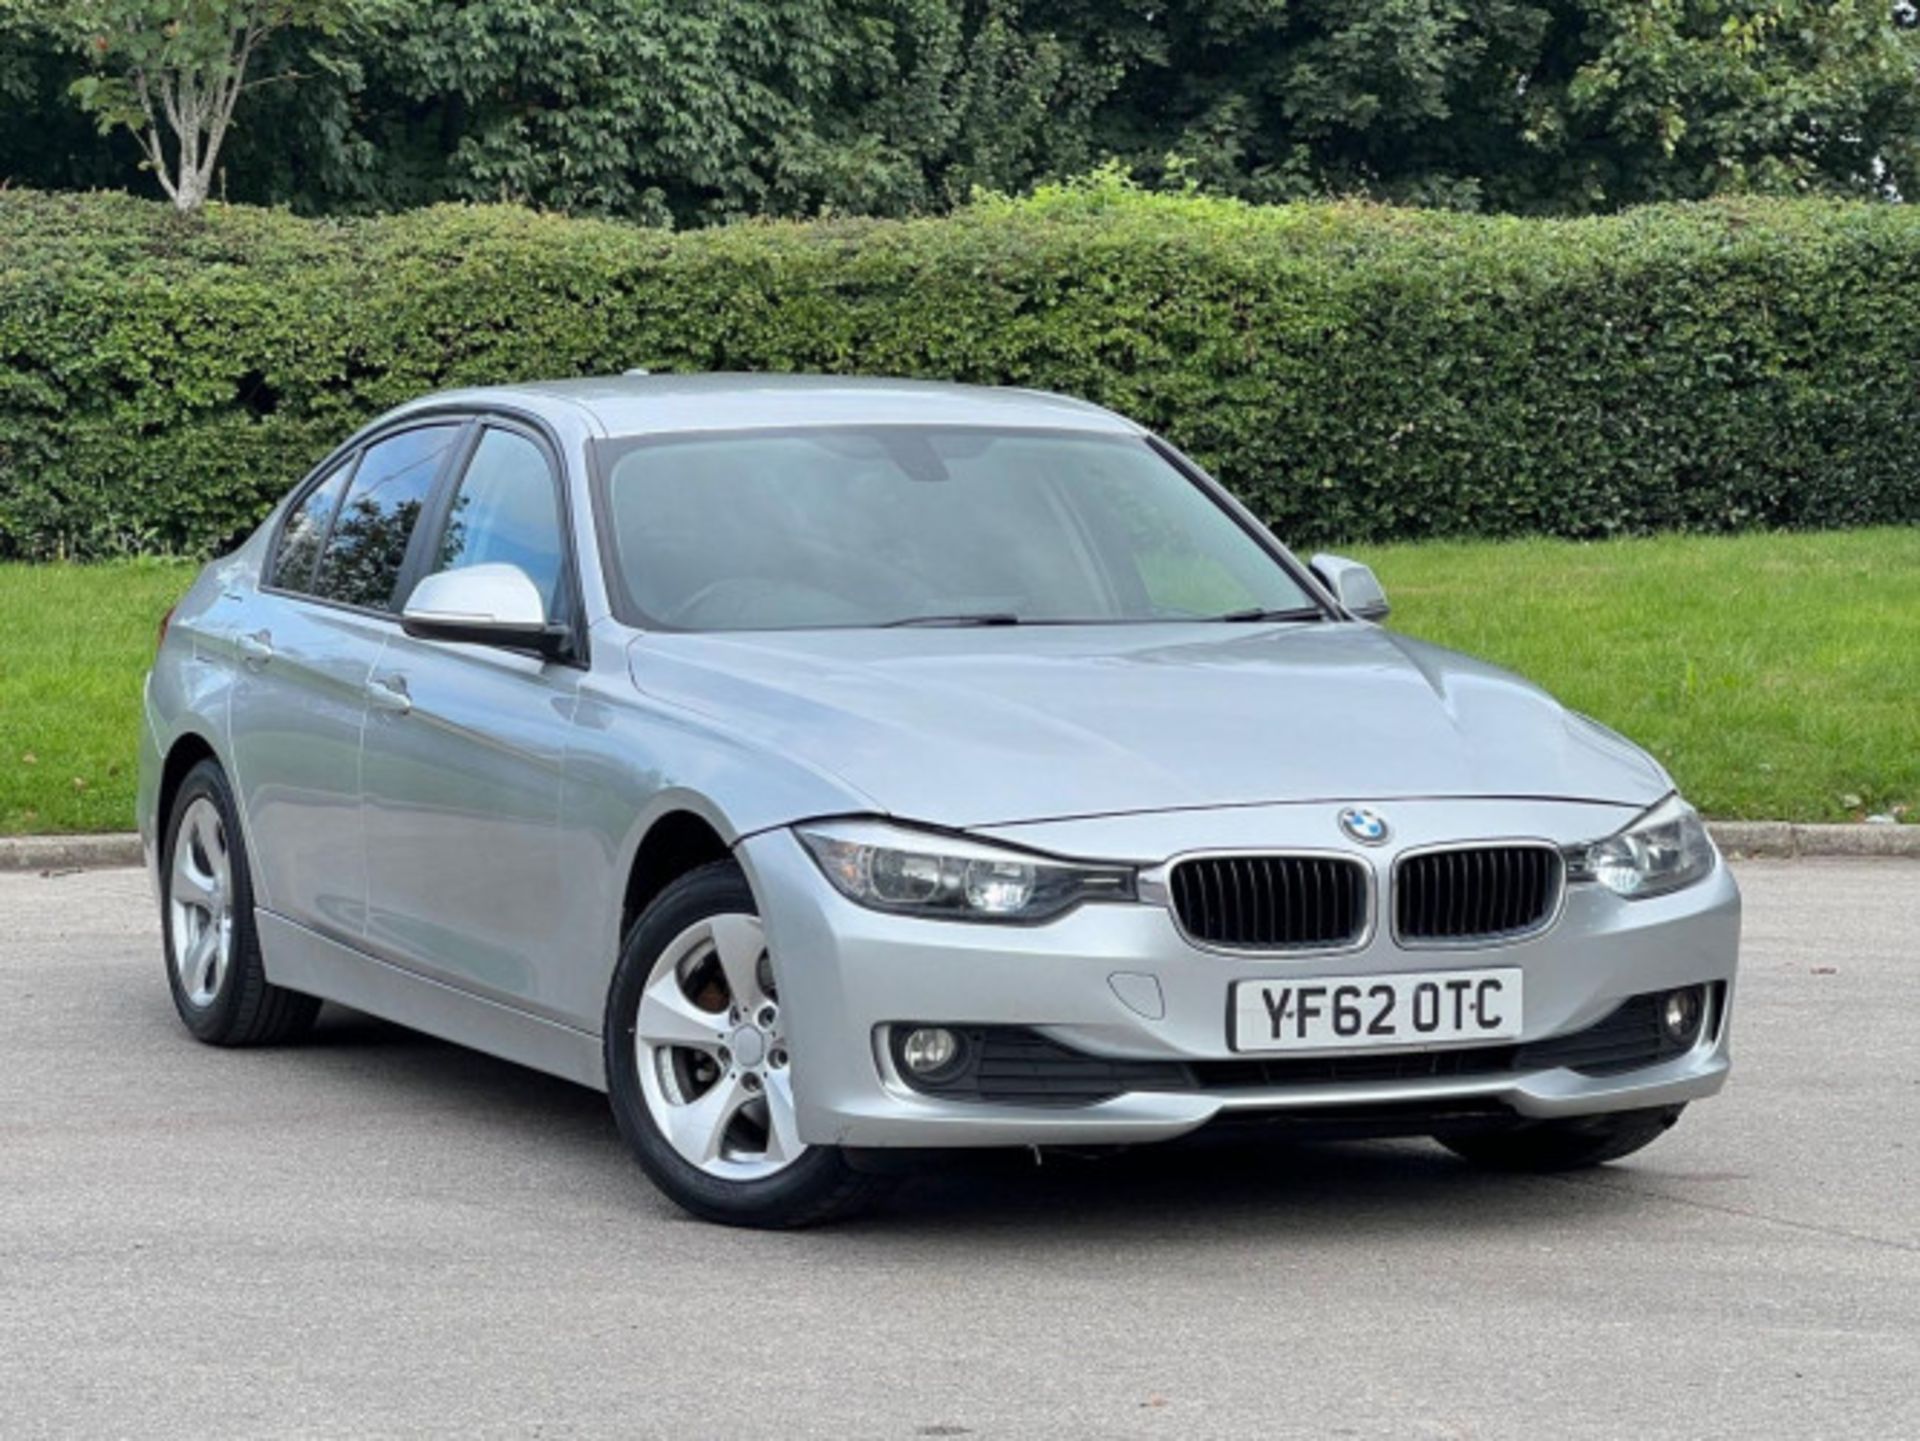 BMW 3 SERIES 2.0 DIESEL ED START STOP - A WELL-MAINTAINED GEM >>--NO VAT ON HAMMER--<< - Image 13 of 229